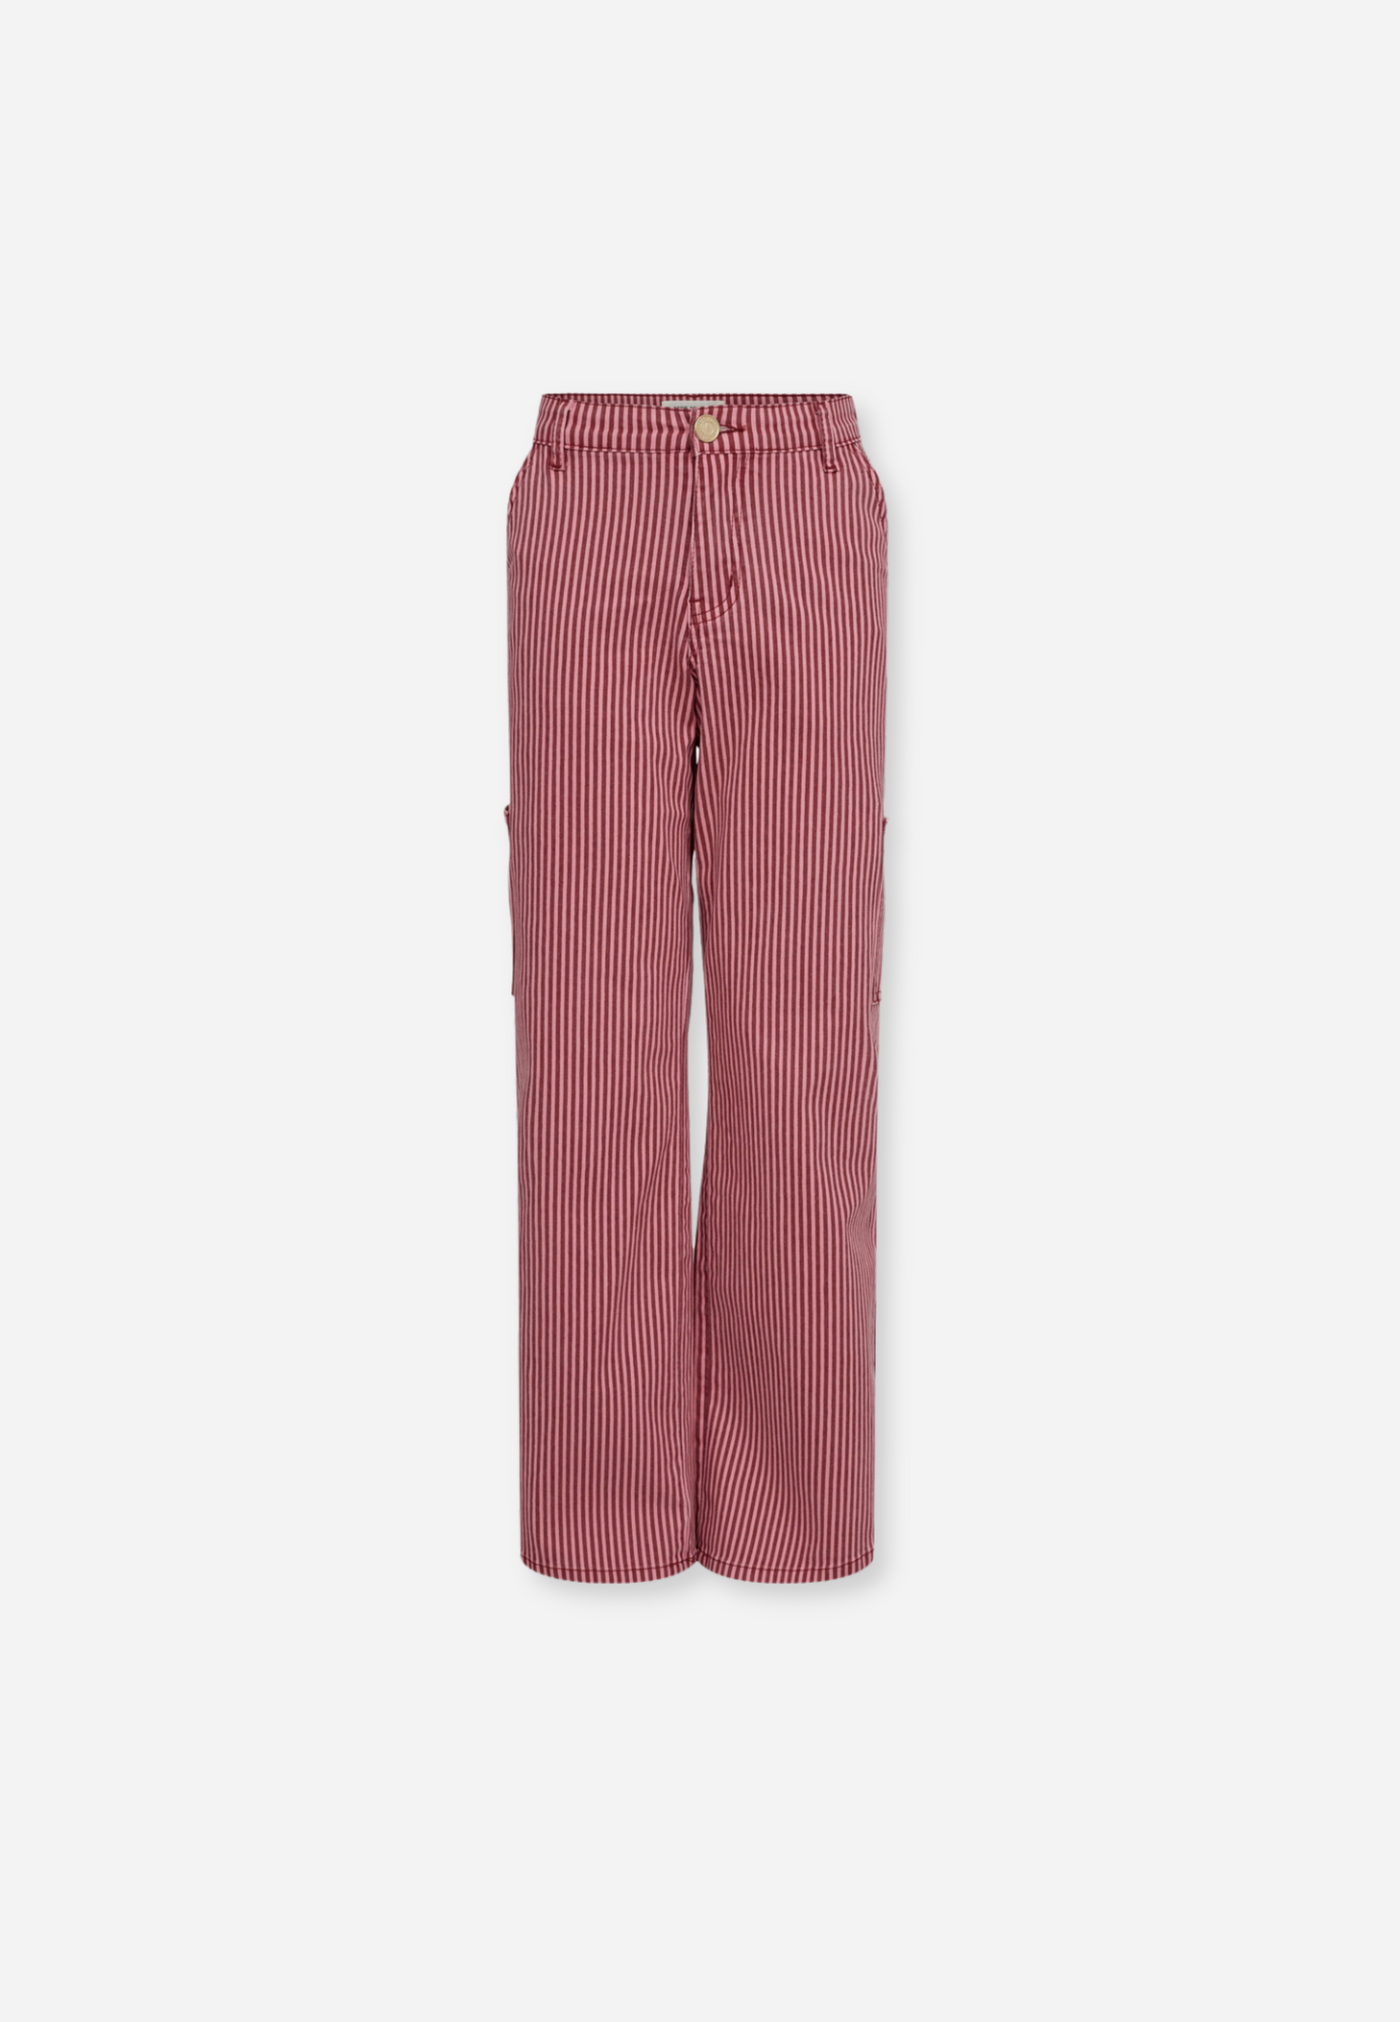 PANTS - RED STRIPED